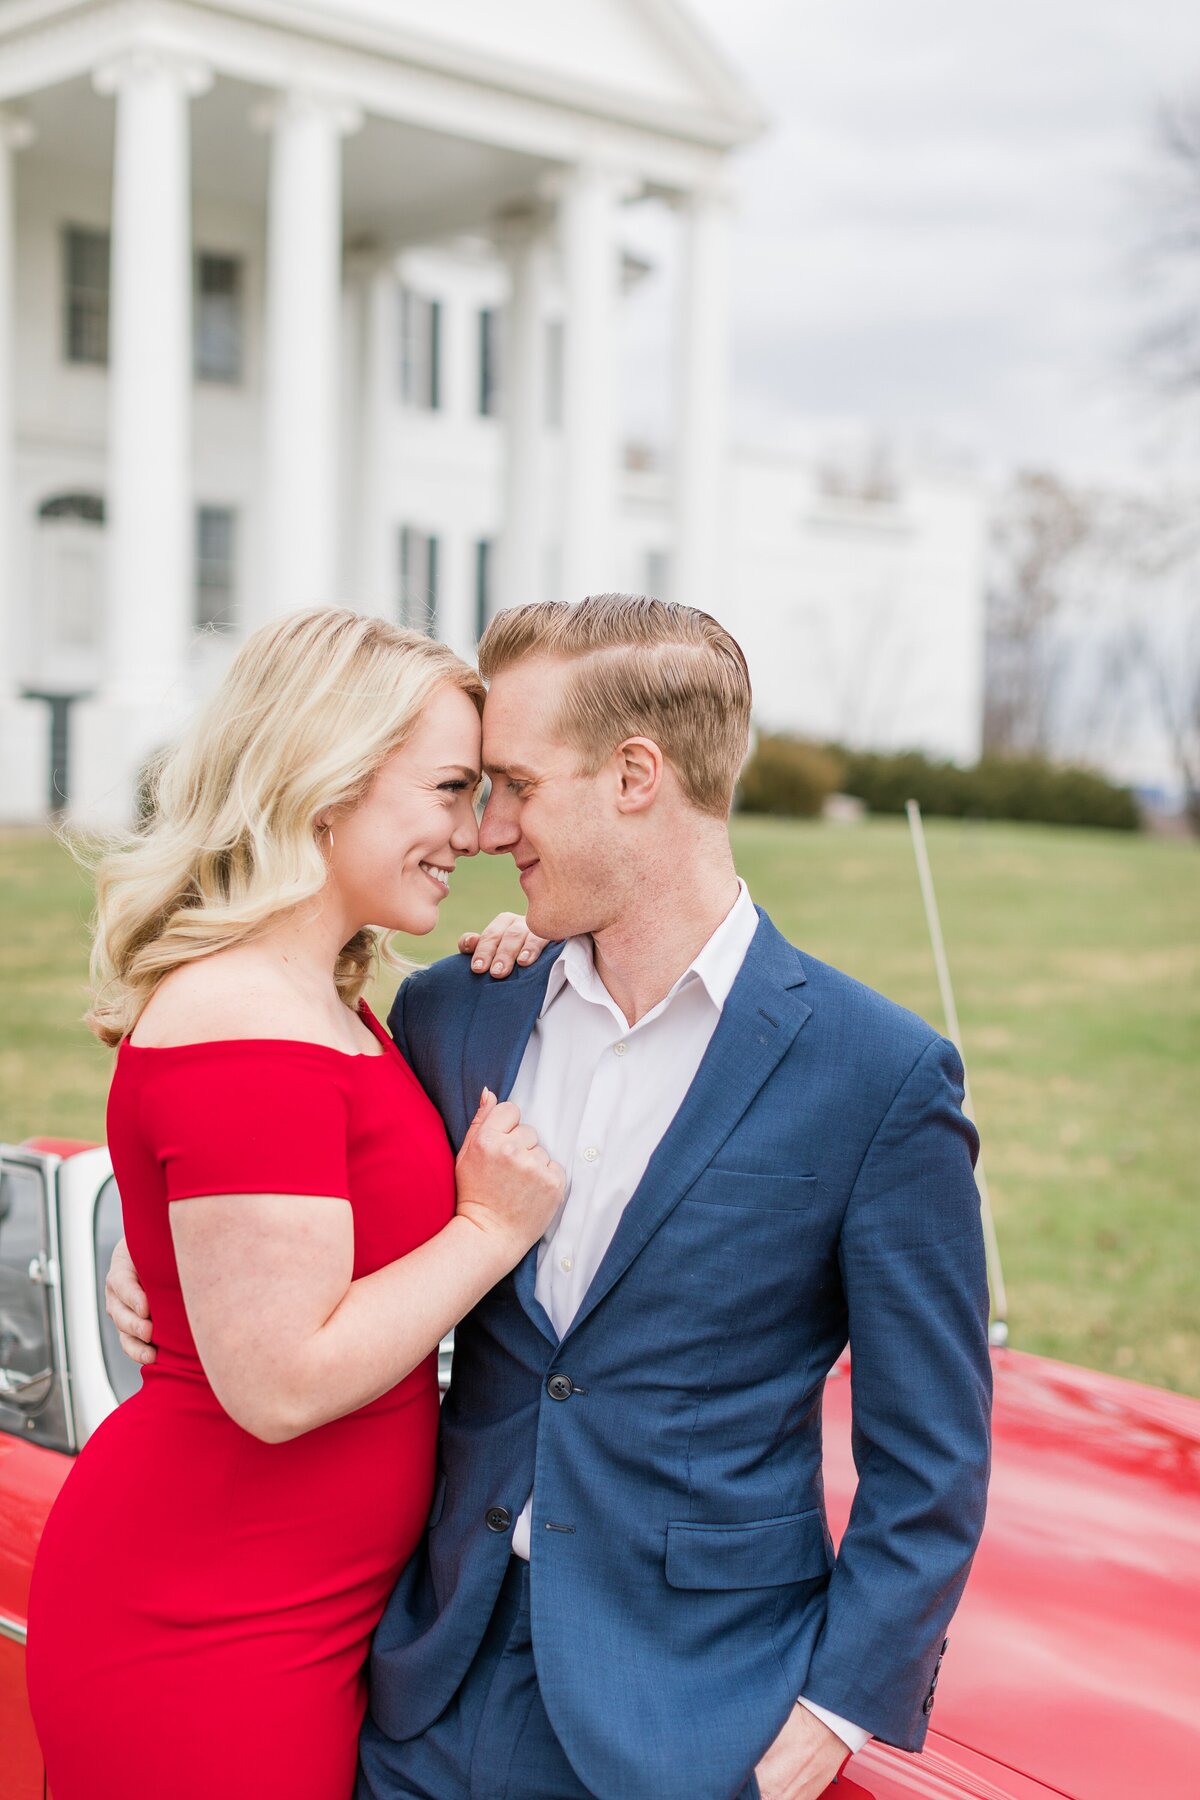 Vintage-Car-Engagement-Photos-DC-Maryland-Silver-Orchard-Creative_0006